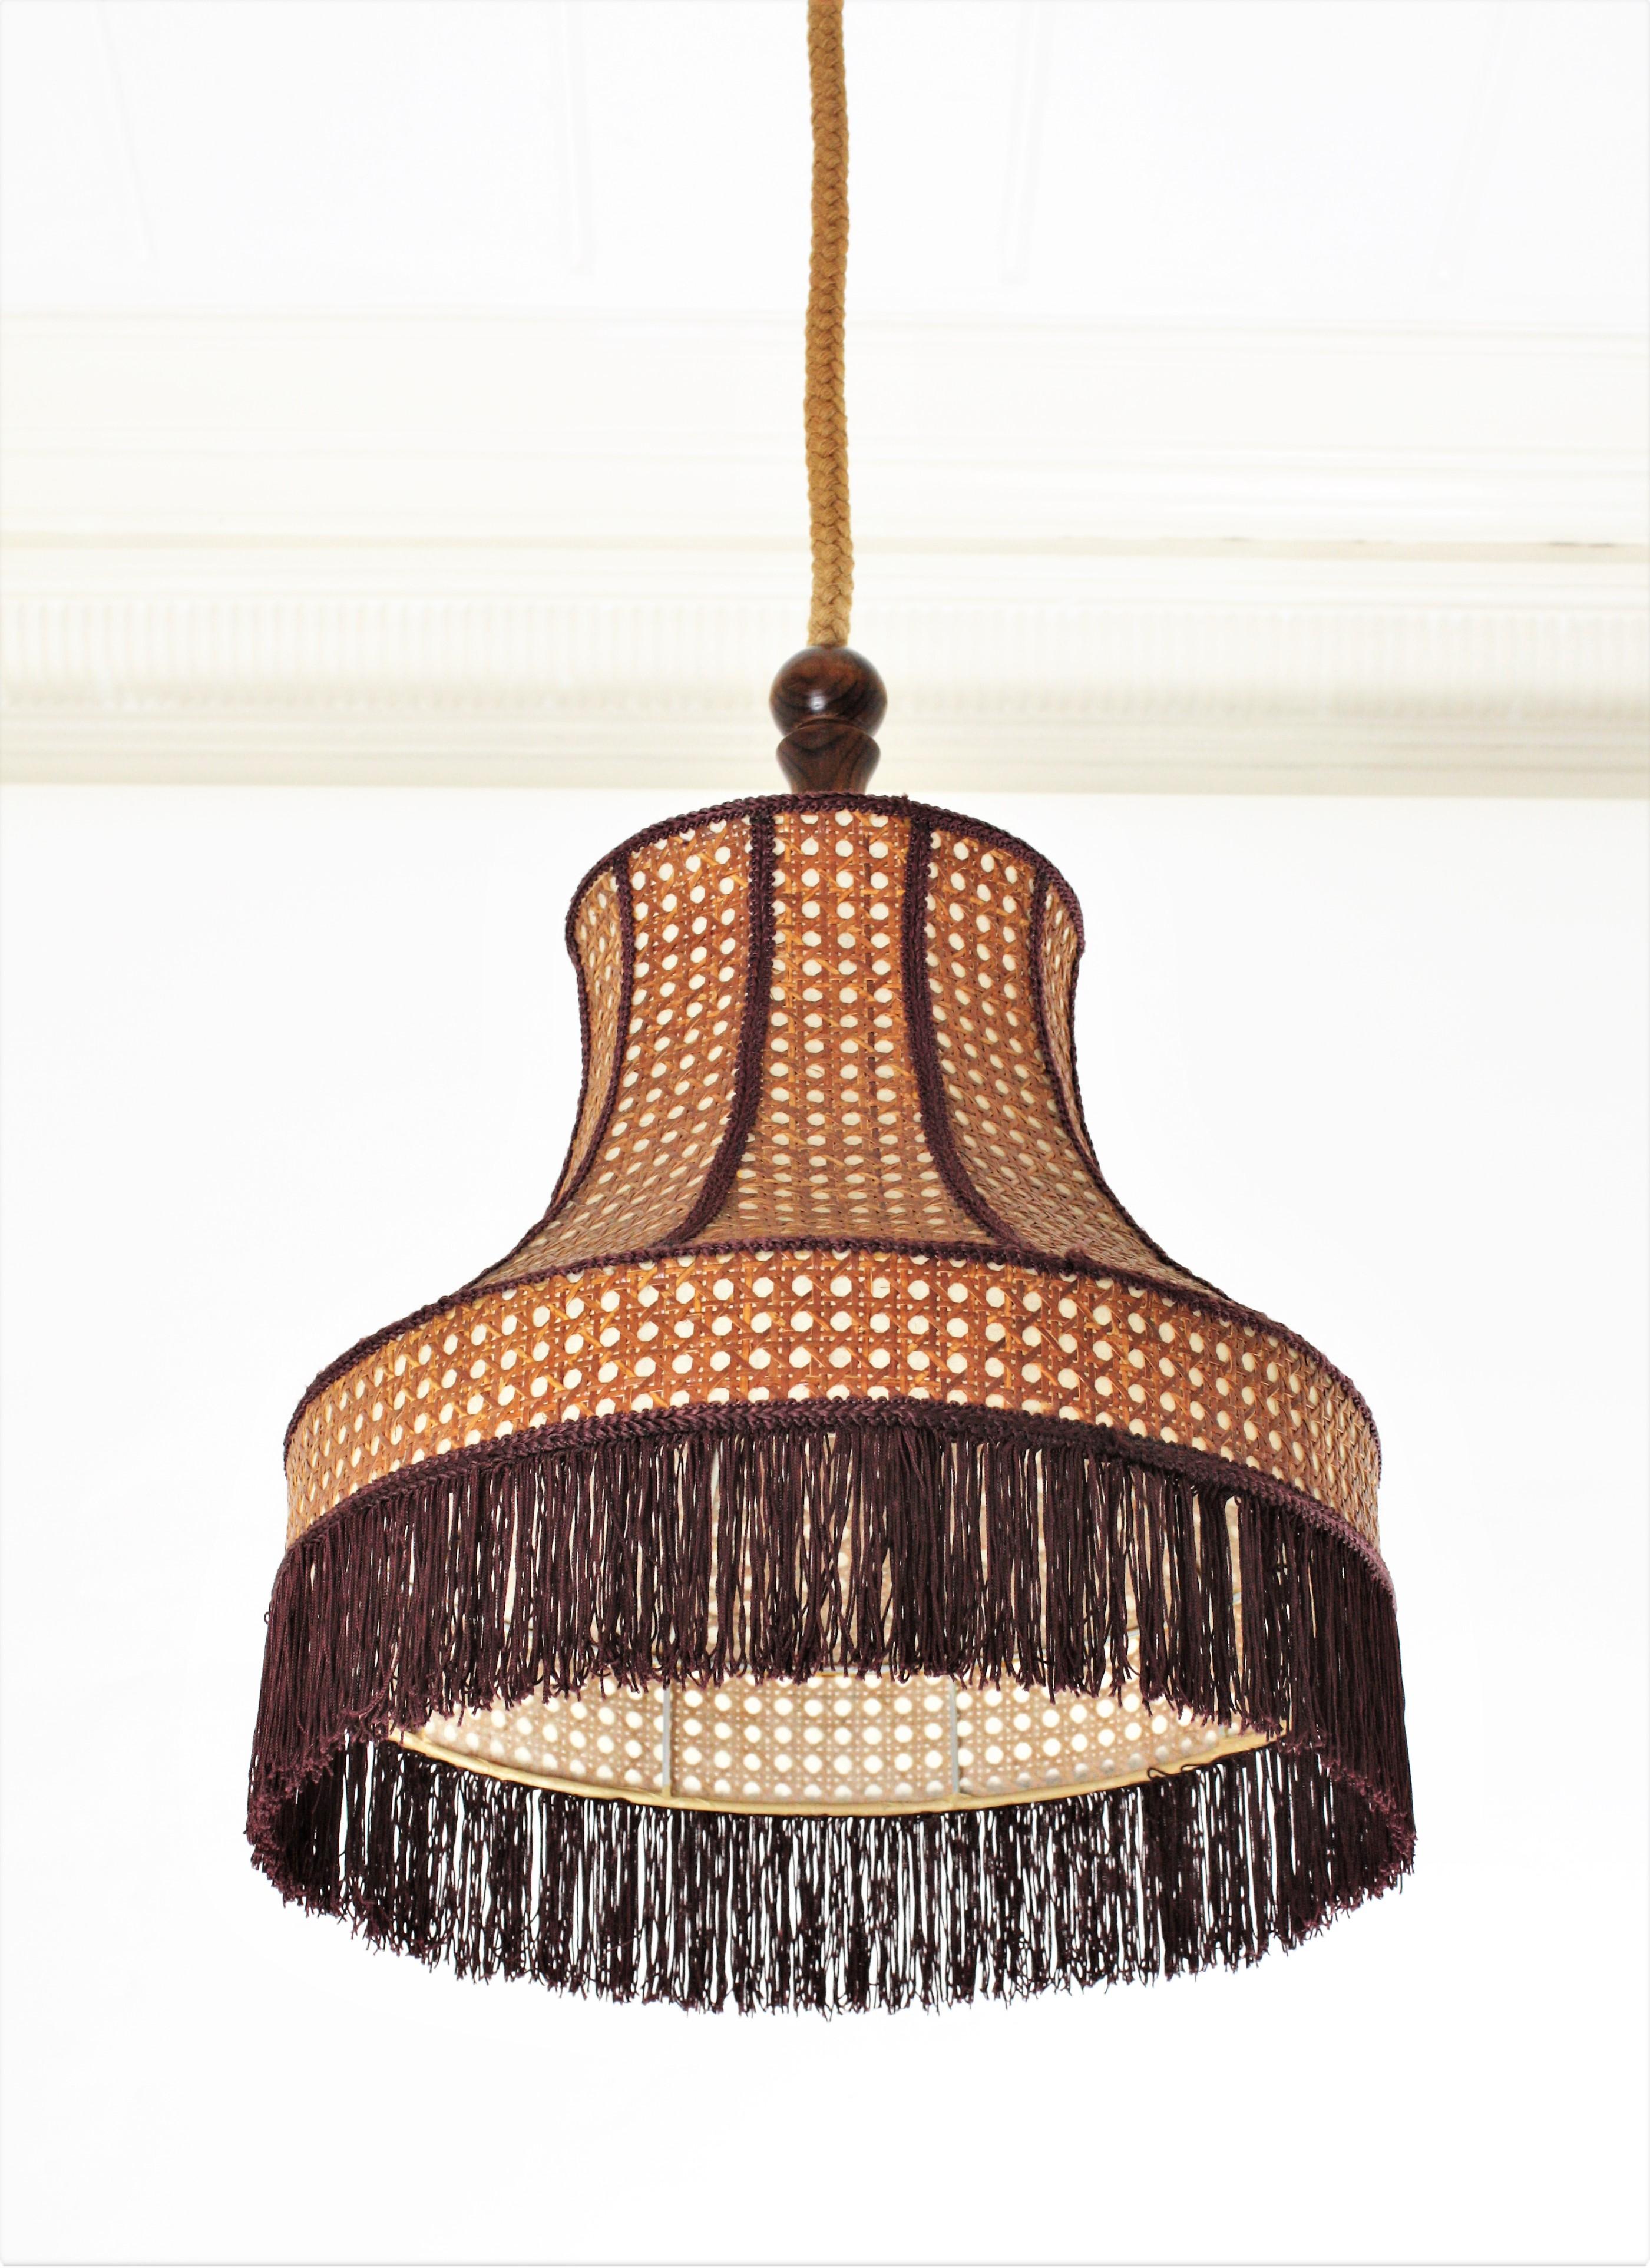 Rattan Wicker Pendant Hanging Lamp with Pagoda Shape and Fringed Bottom 2